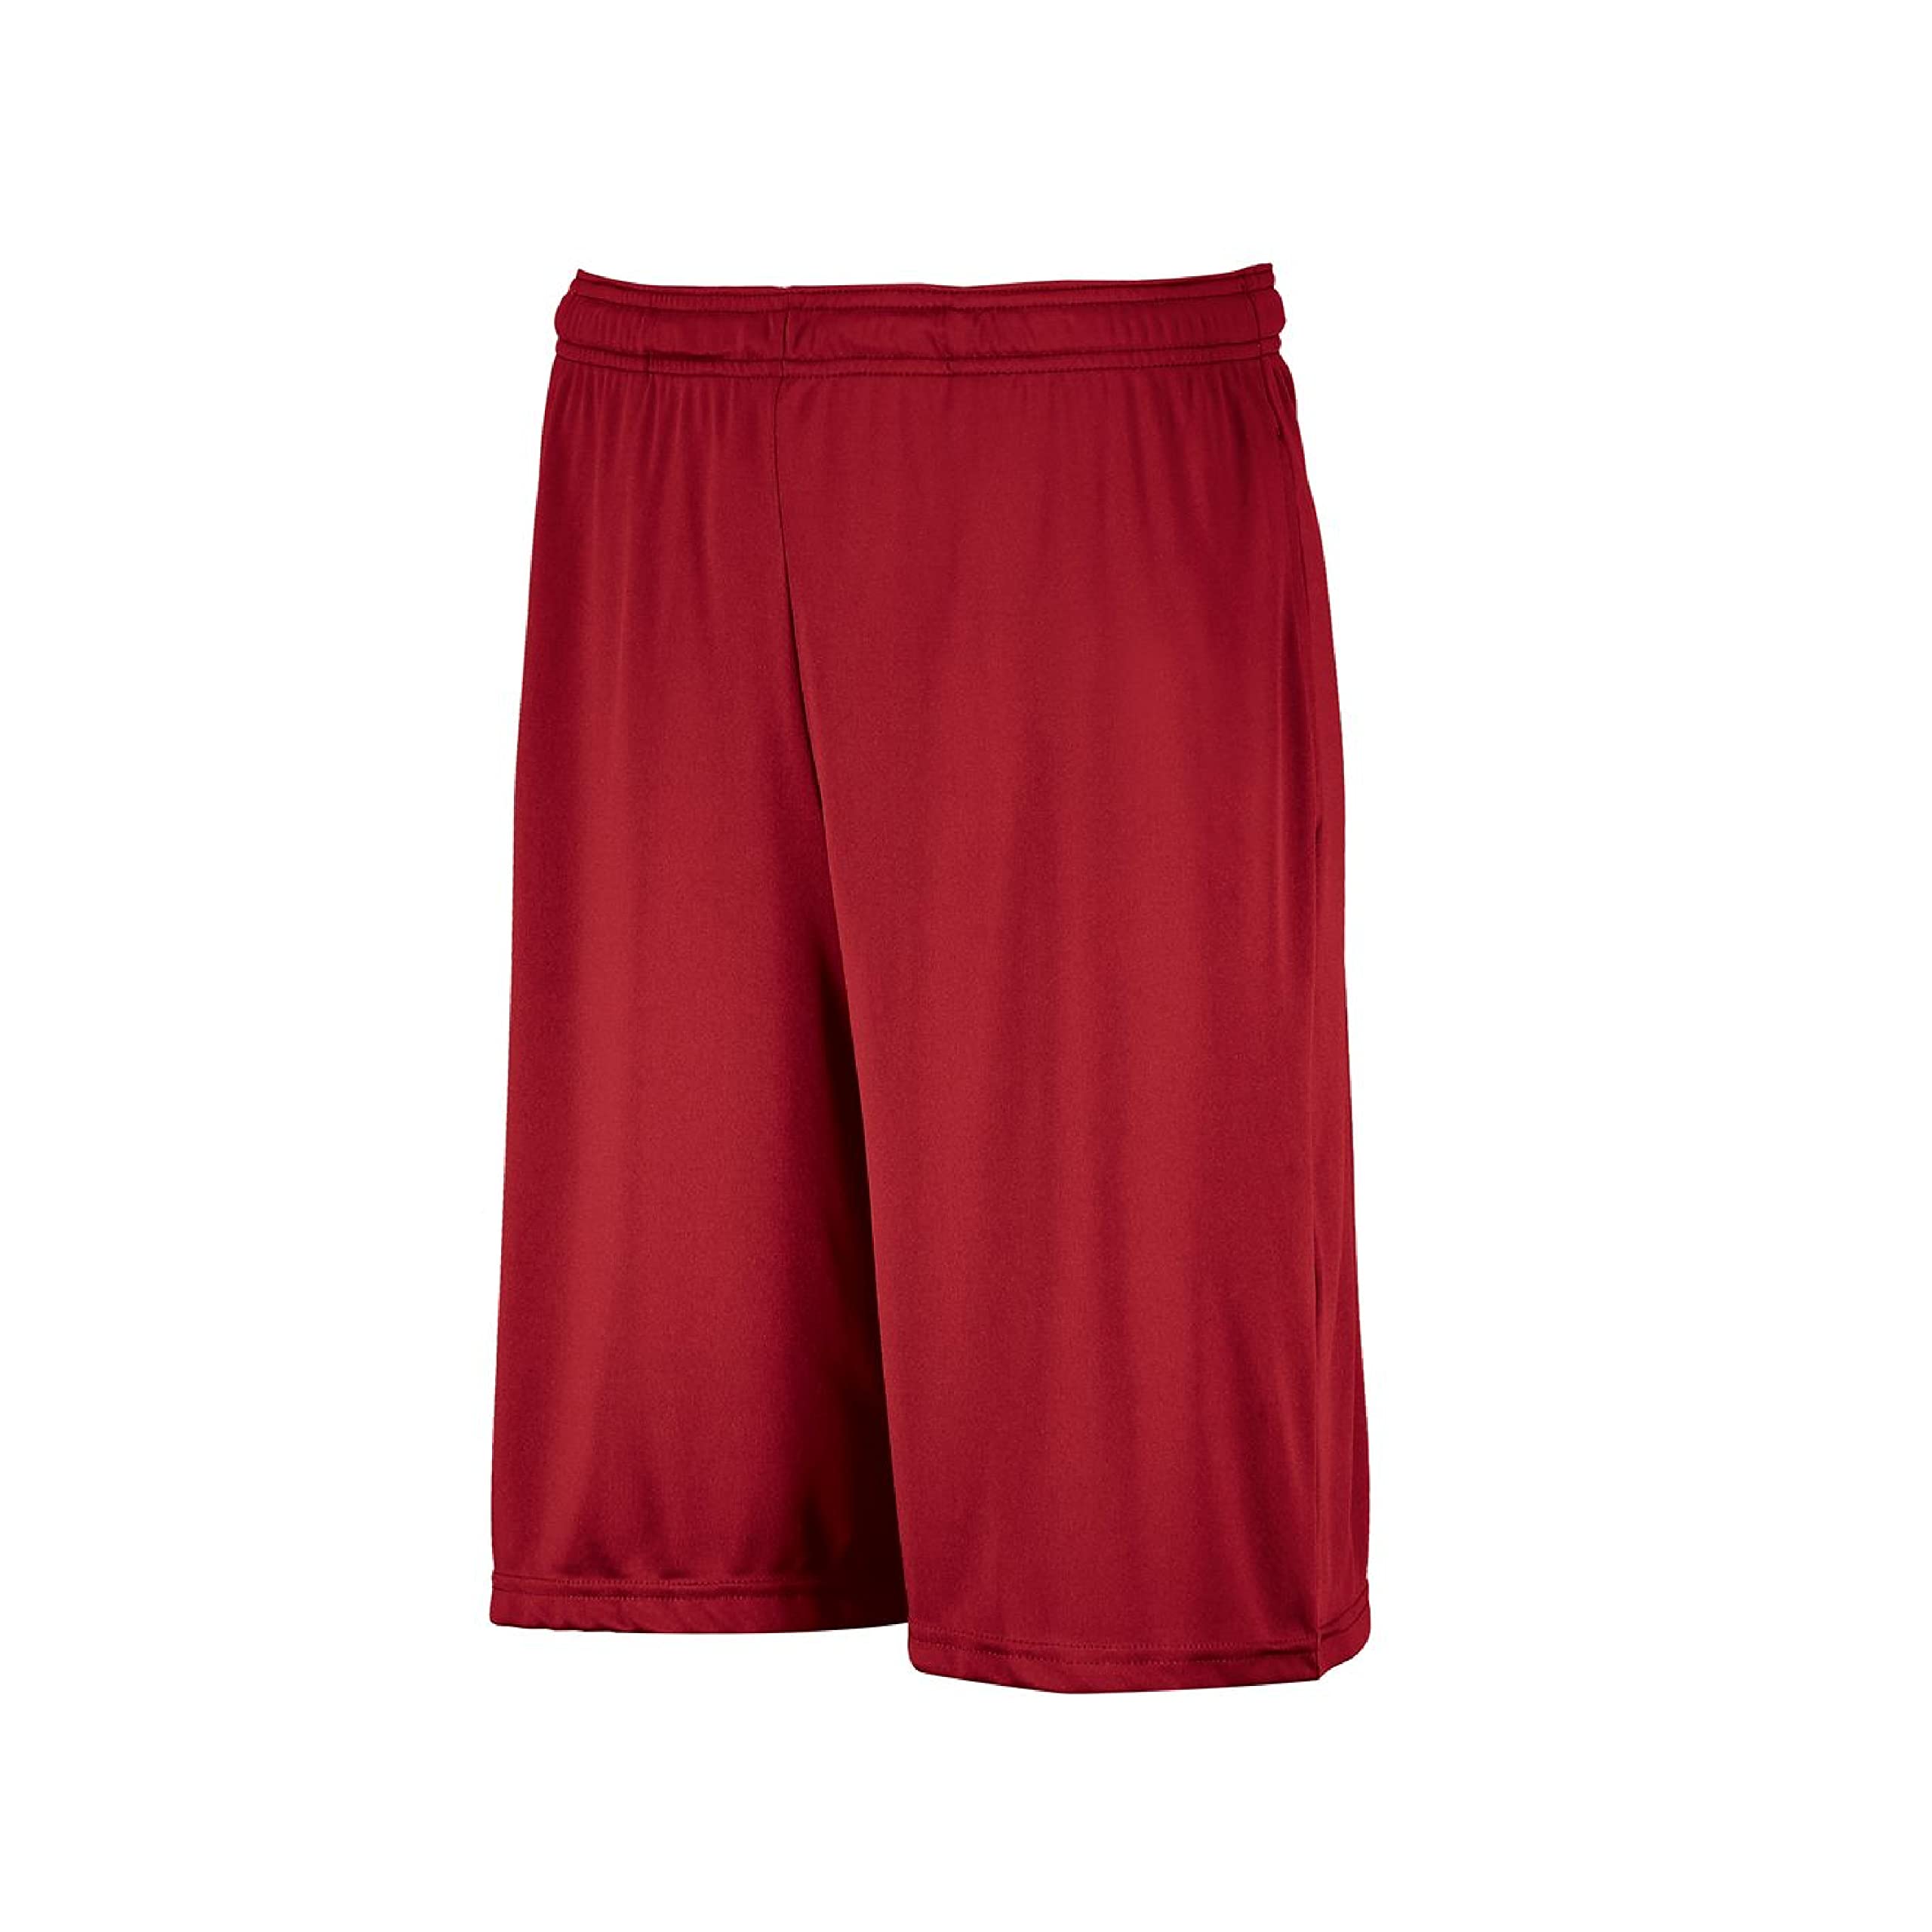 Russell Athletic Mens Standard Dri-Power Performance Short with Pockets, True red, 3XL